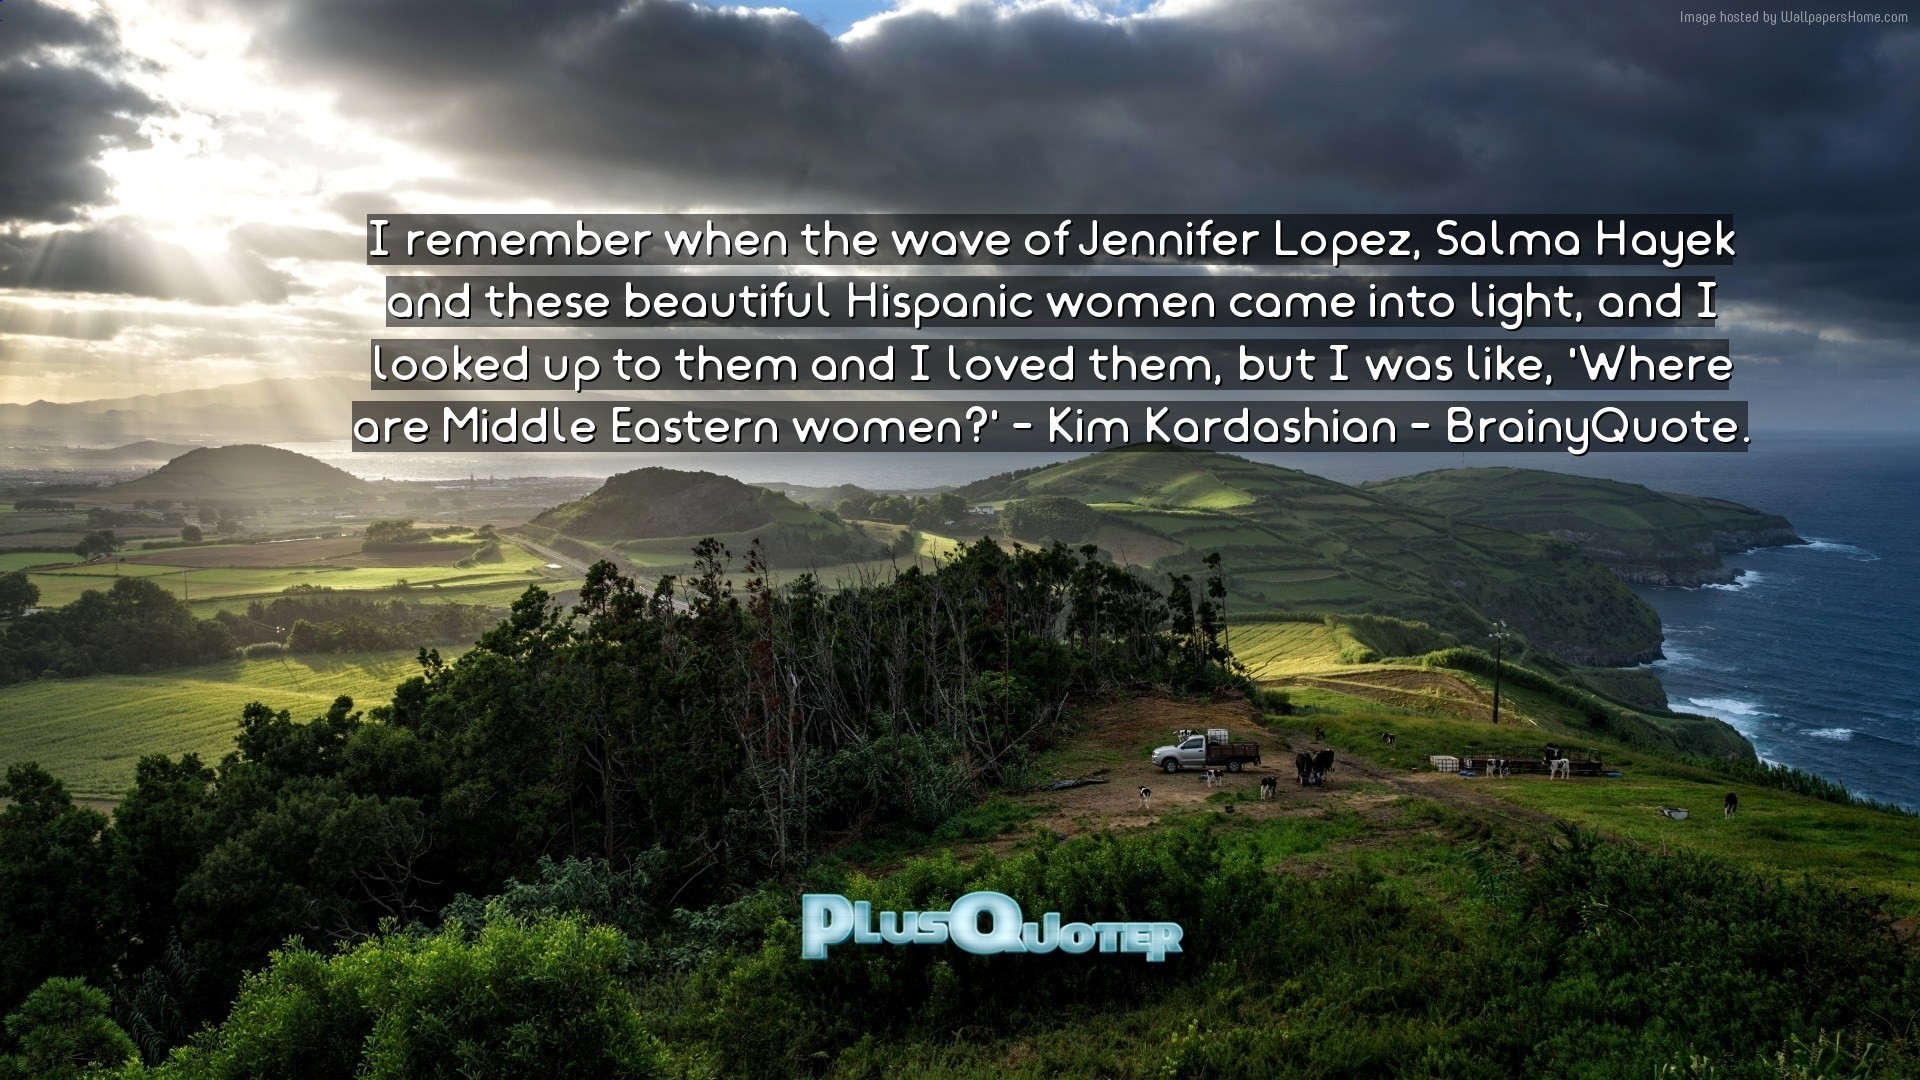 1920x1080 Download Wallpaper with inspirational Quotes- "I remember when the wave of  Jennifer Lopez,